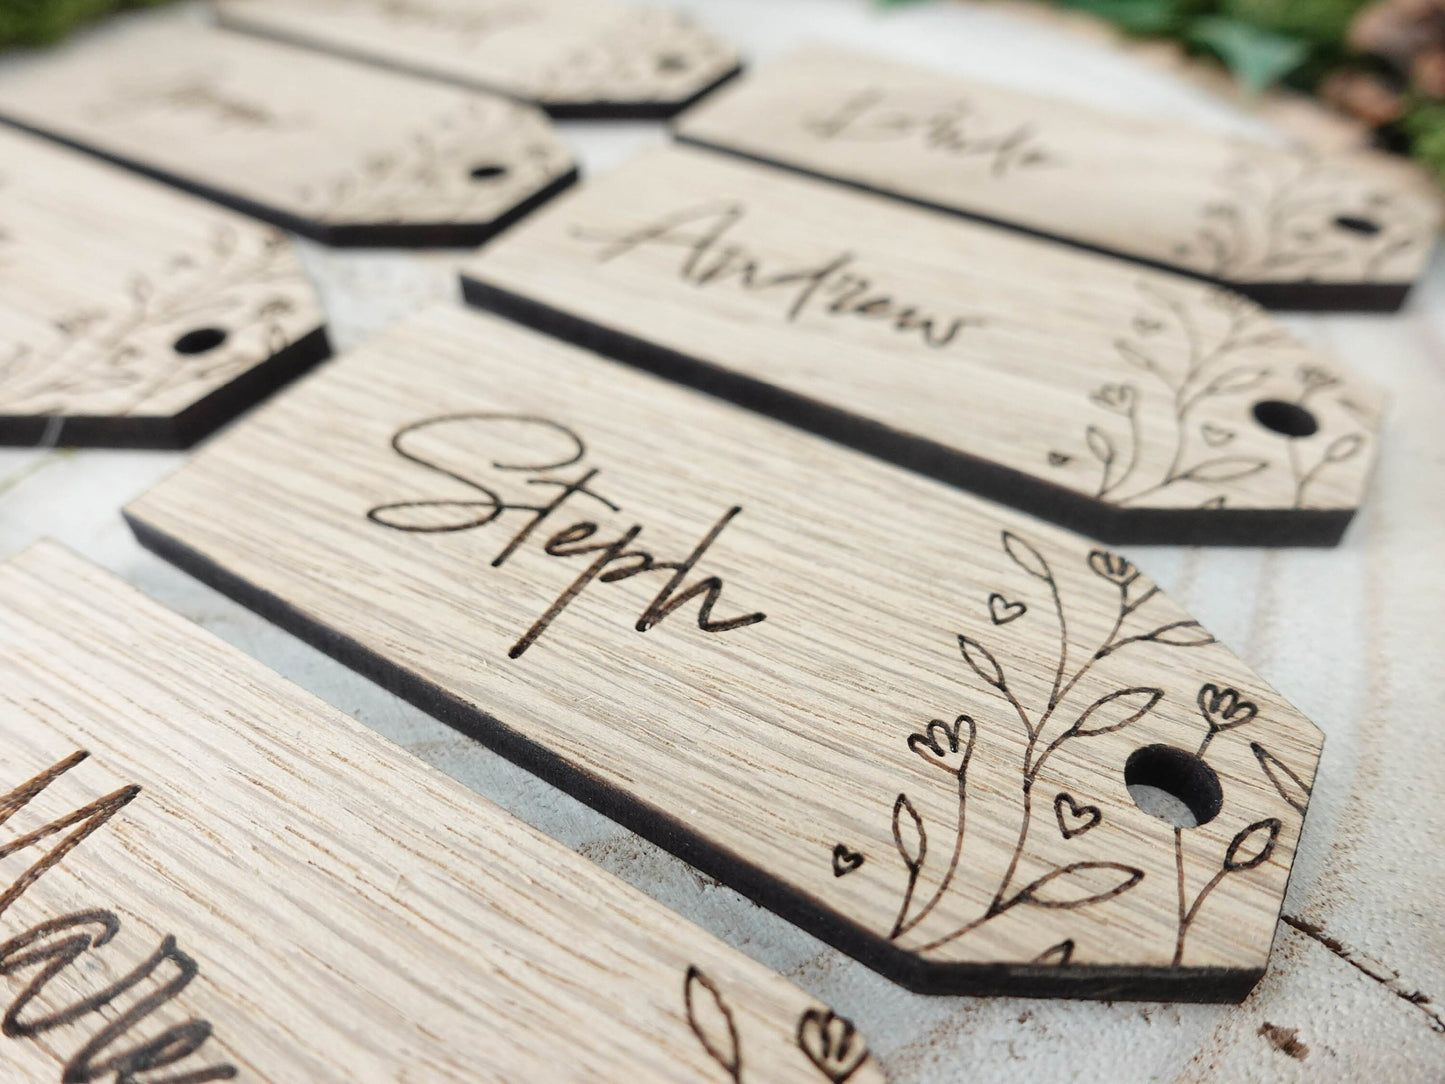 Wooden table place names | Wedding floral tag place setting VA193